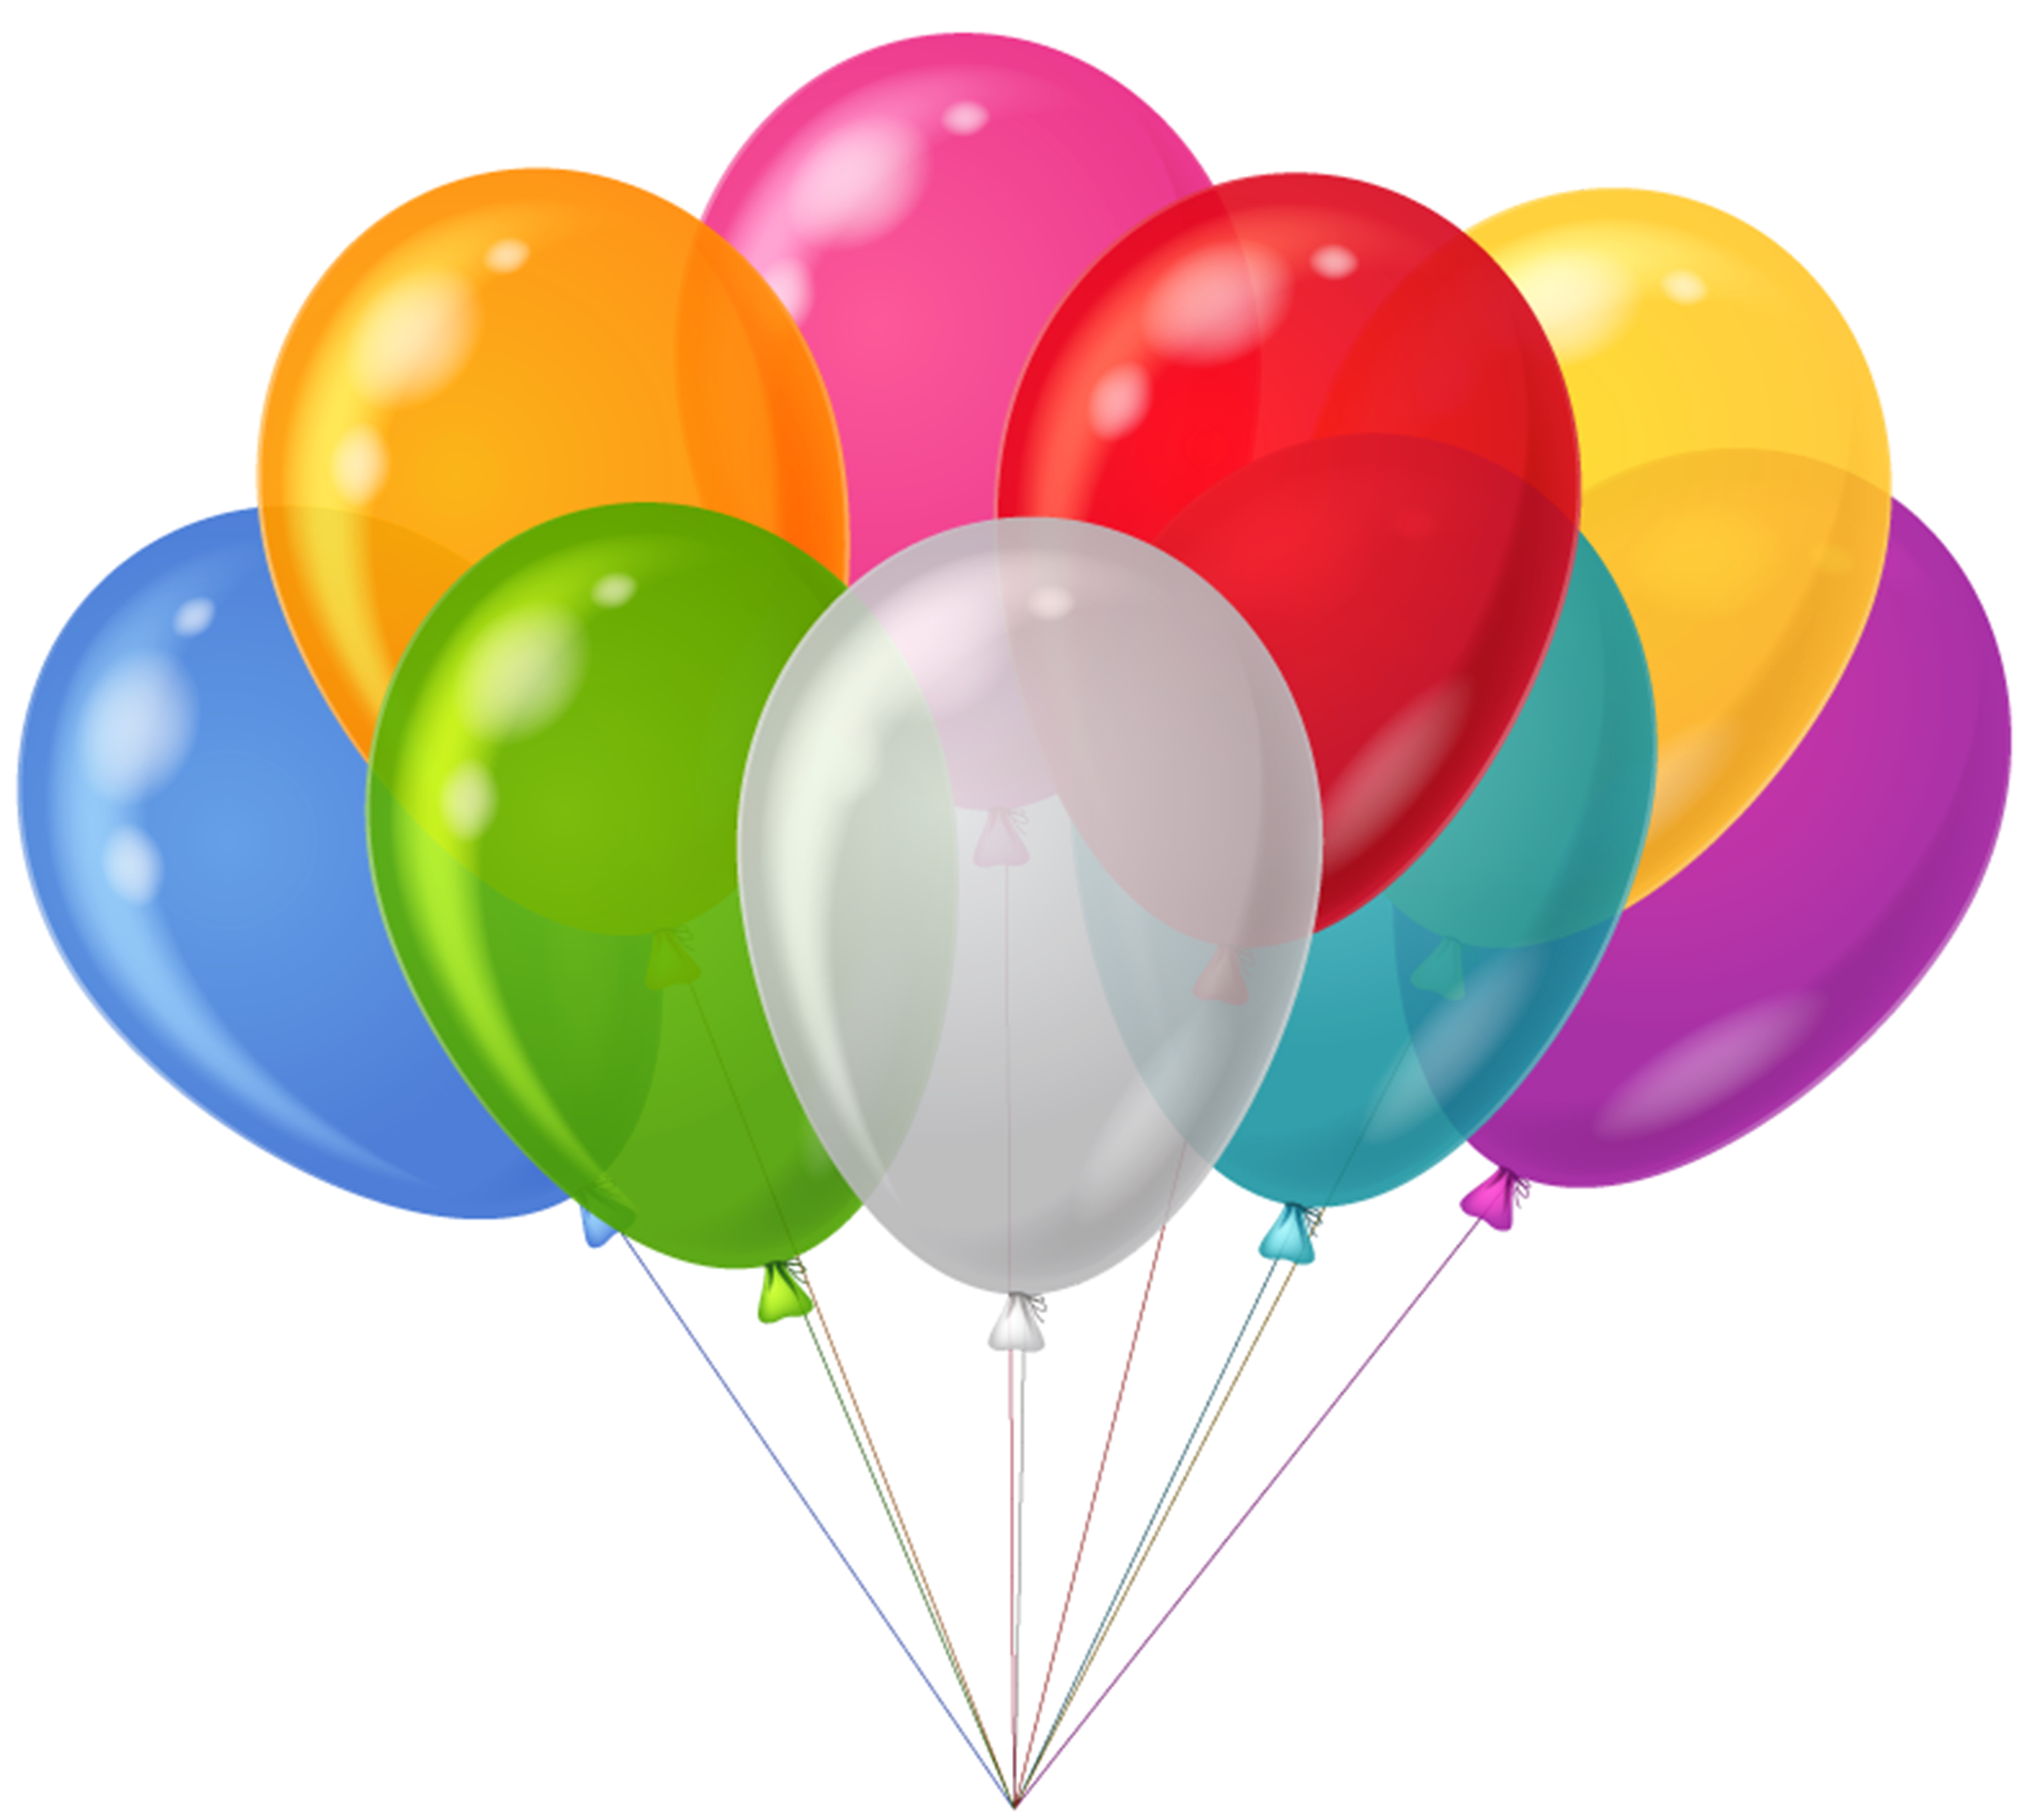 Balloons clipart birthday pictures background - ClipartFox